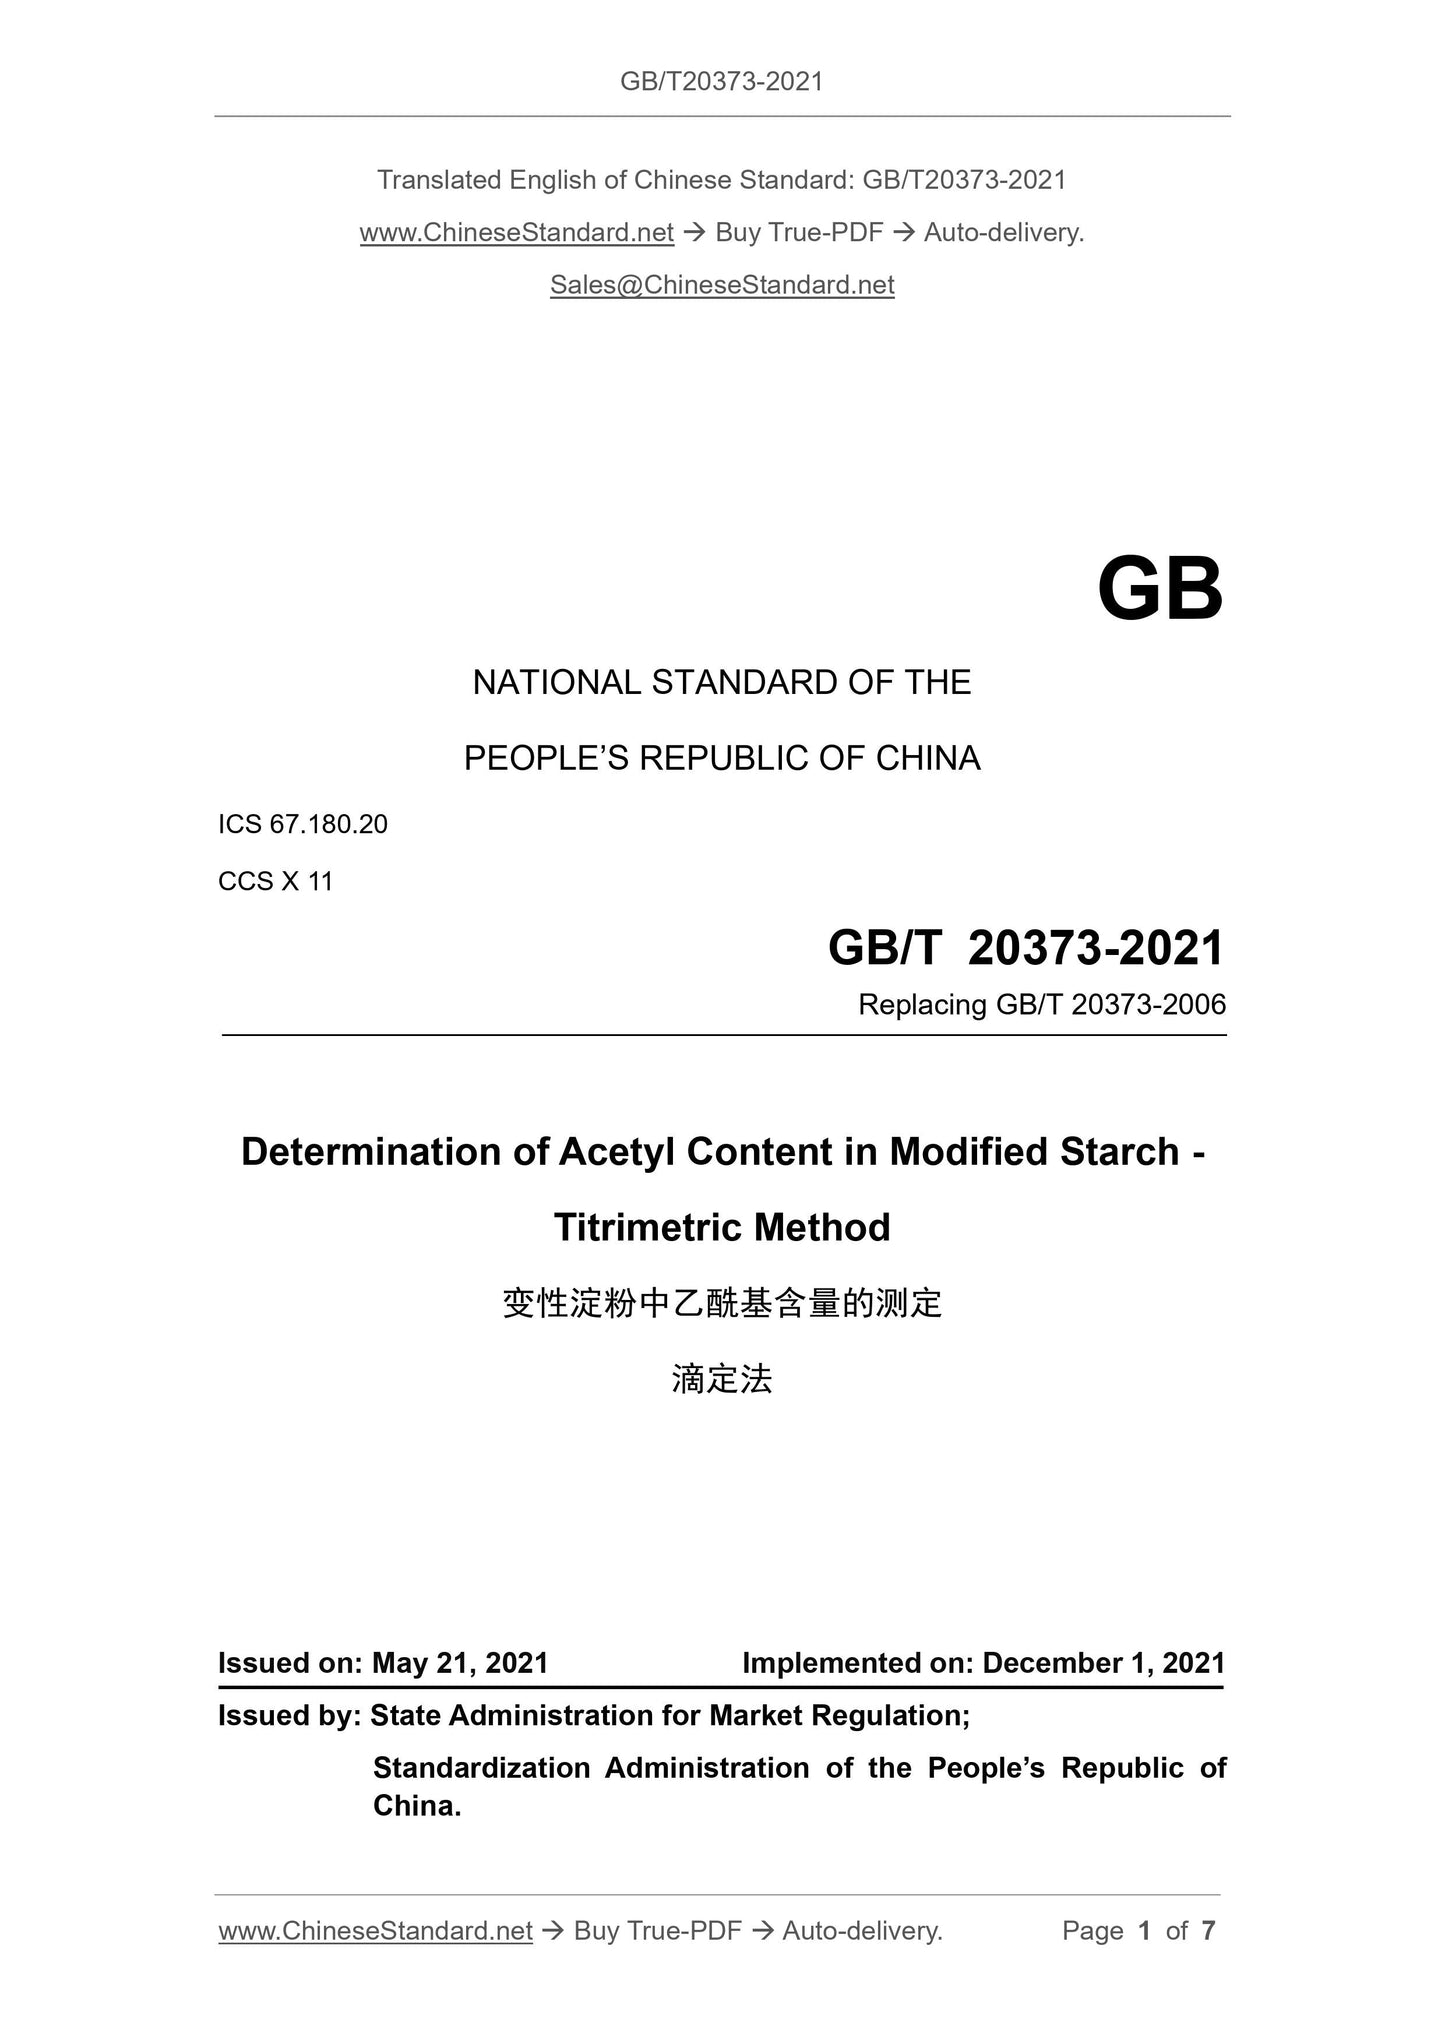 GB/T 20373-2021 Page 1